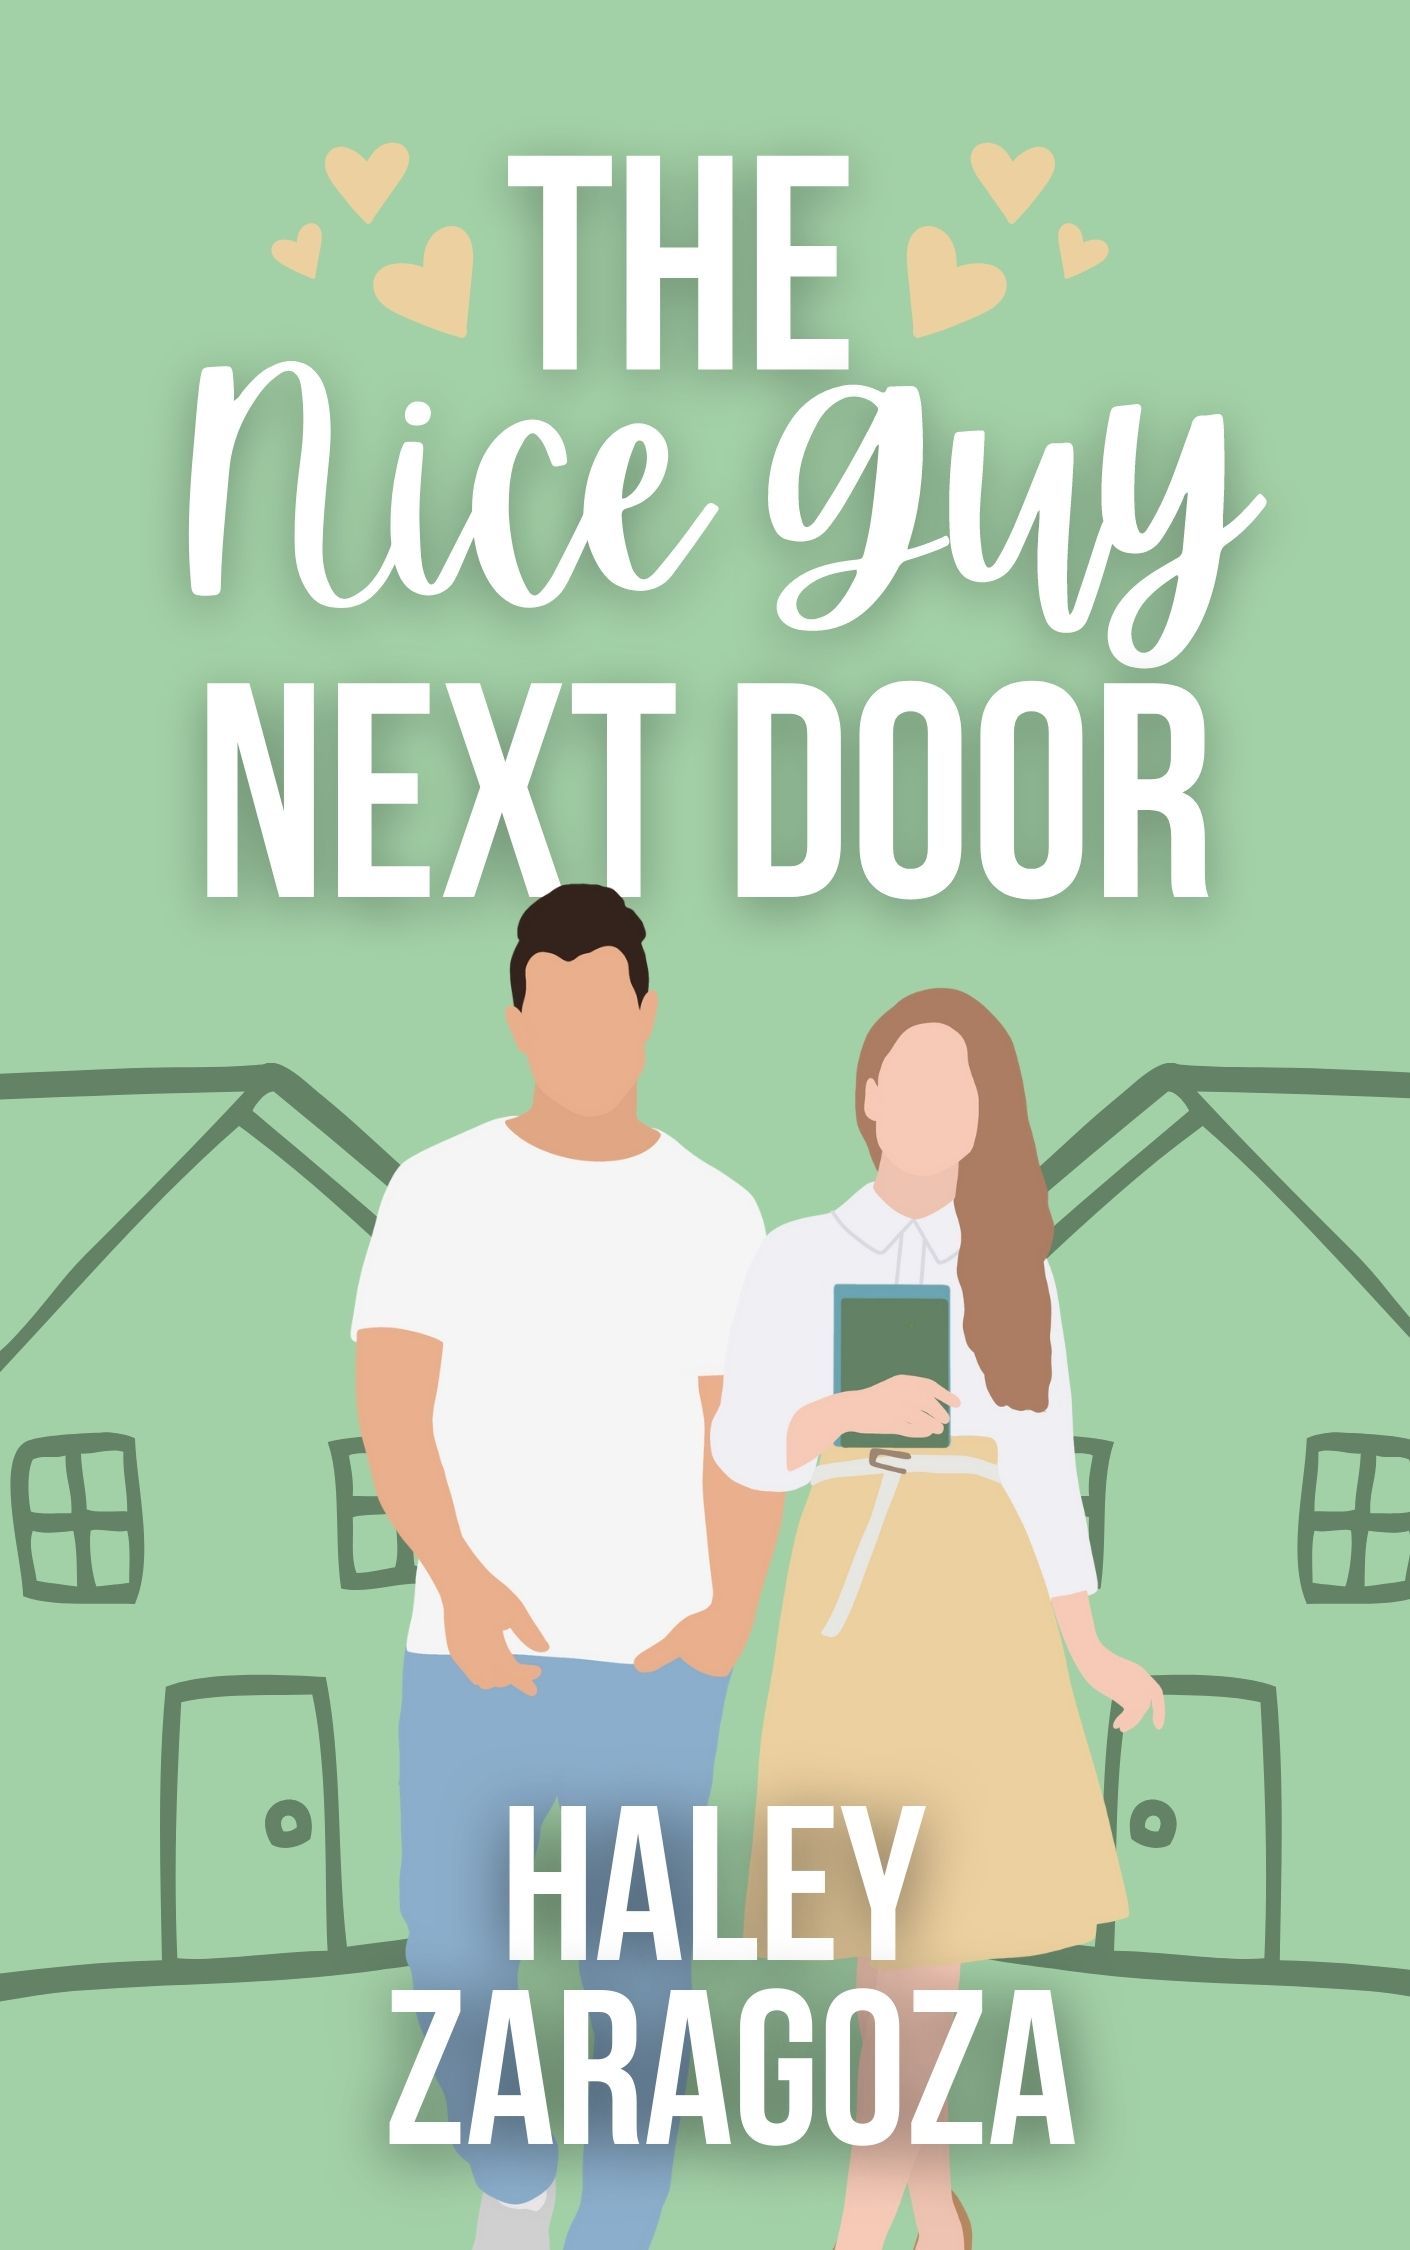 candi johnston recommends average dude next door pic